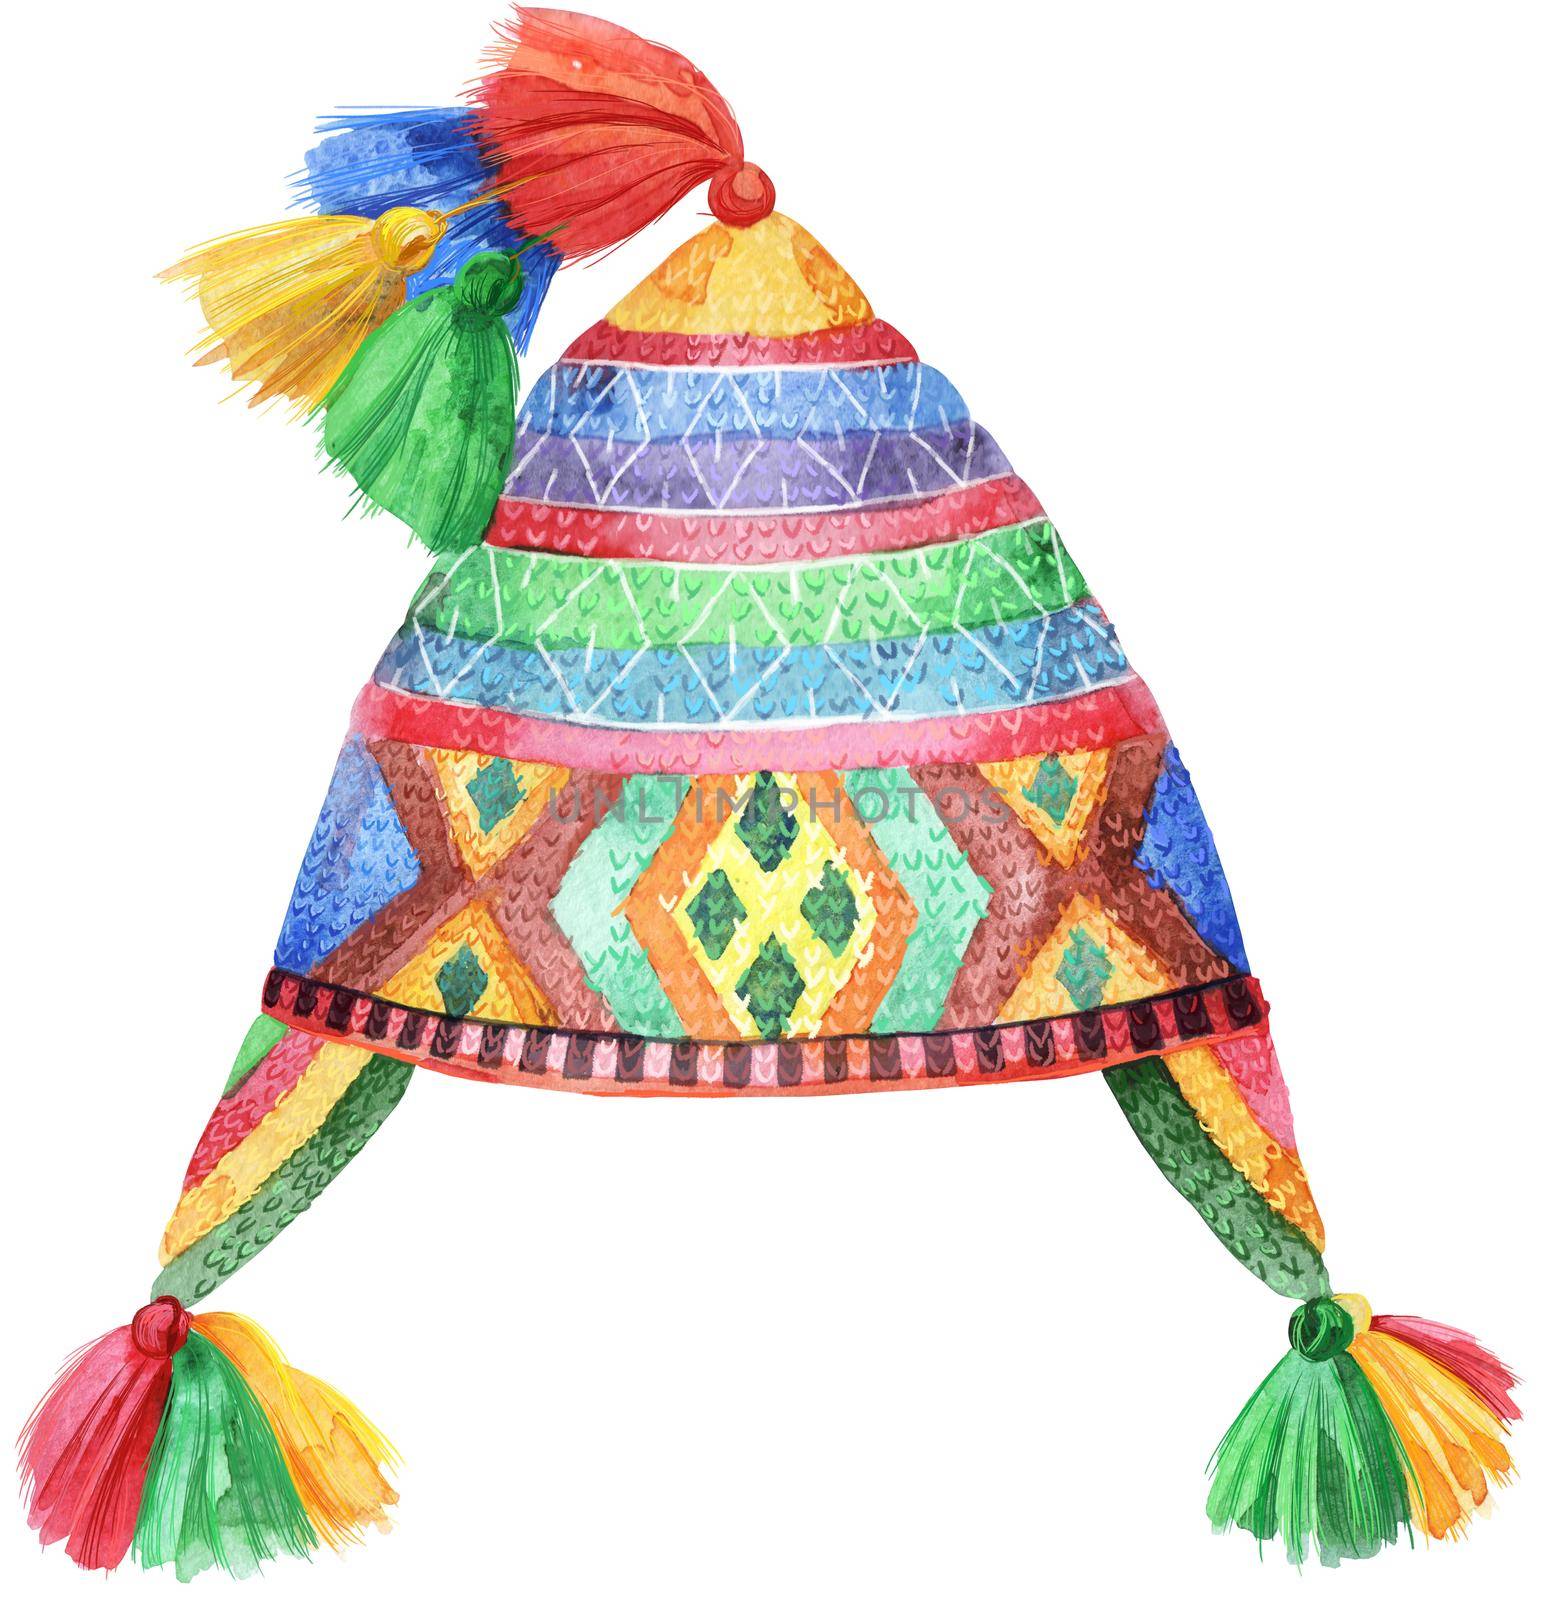 Colorful Peruvian National Chulo hat. Watercolor illustration by NataOmsk